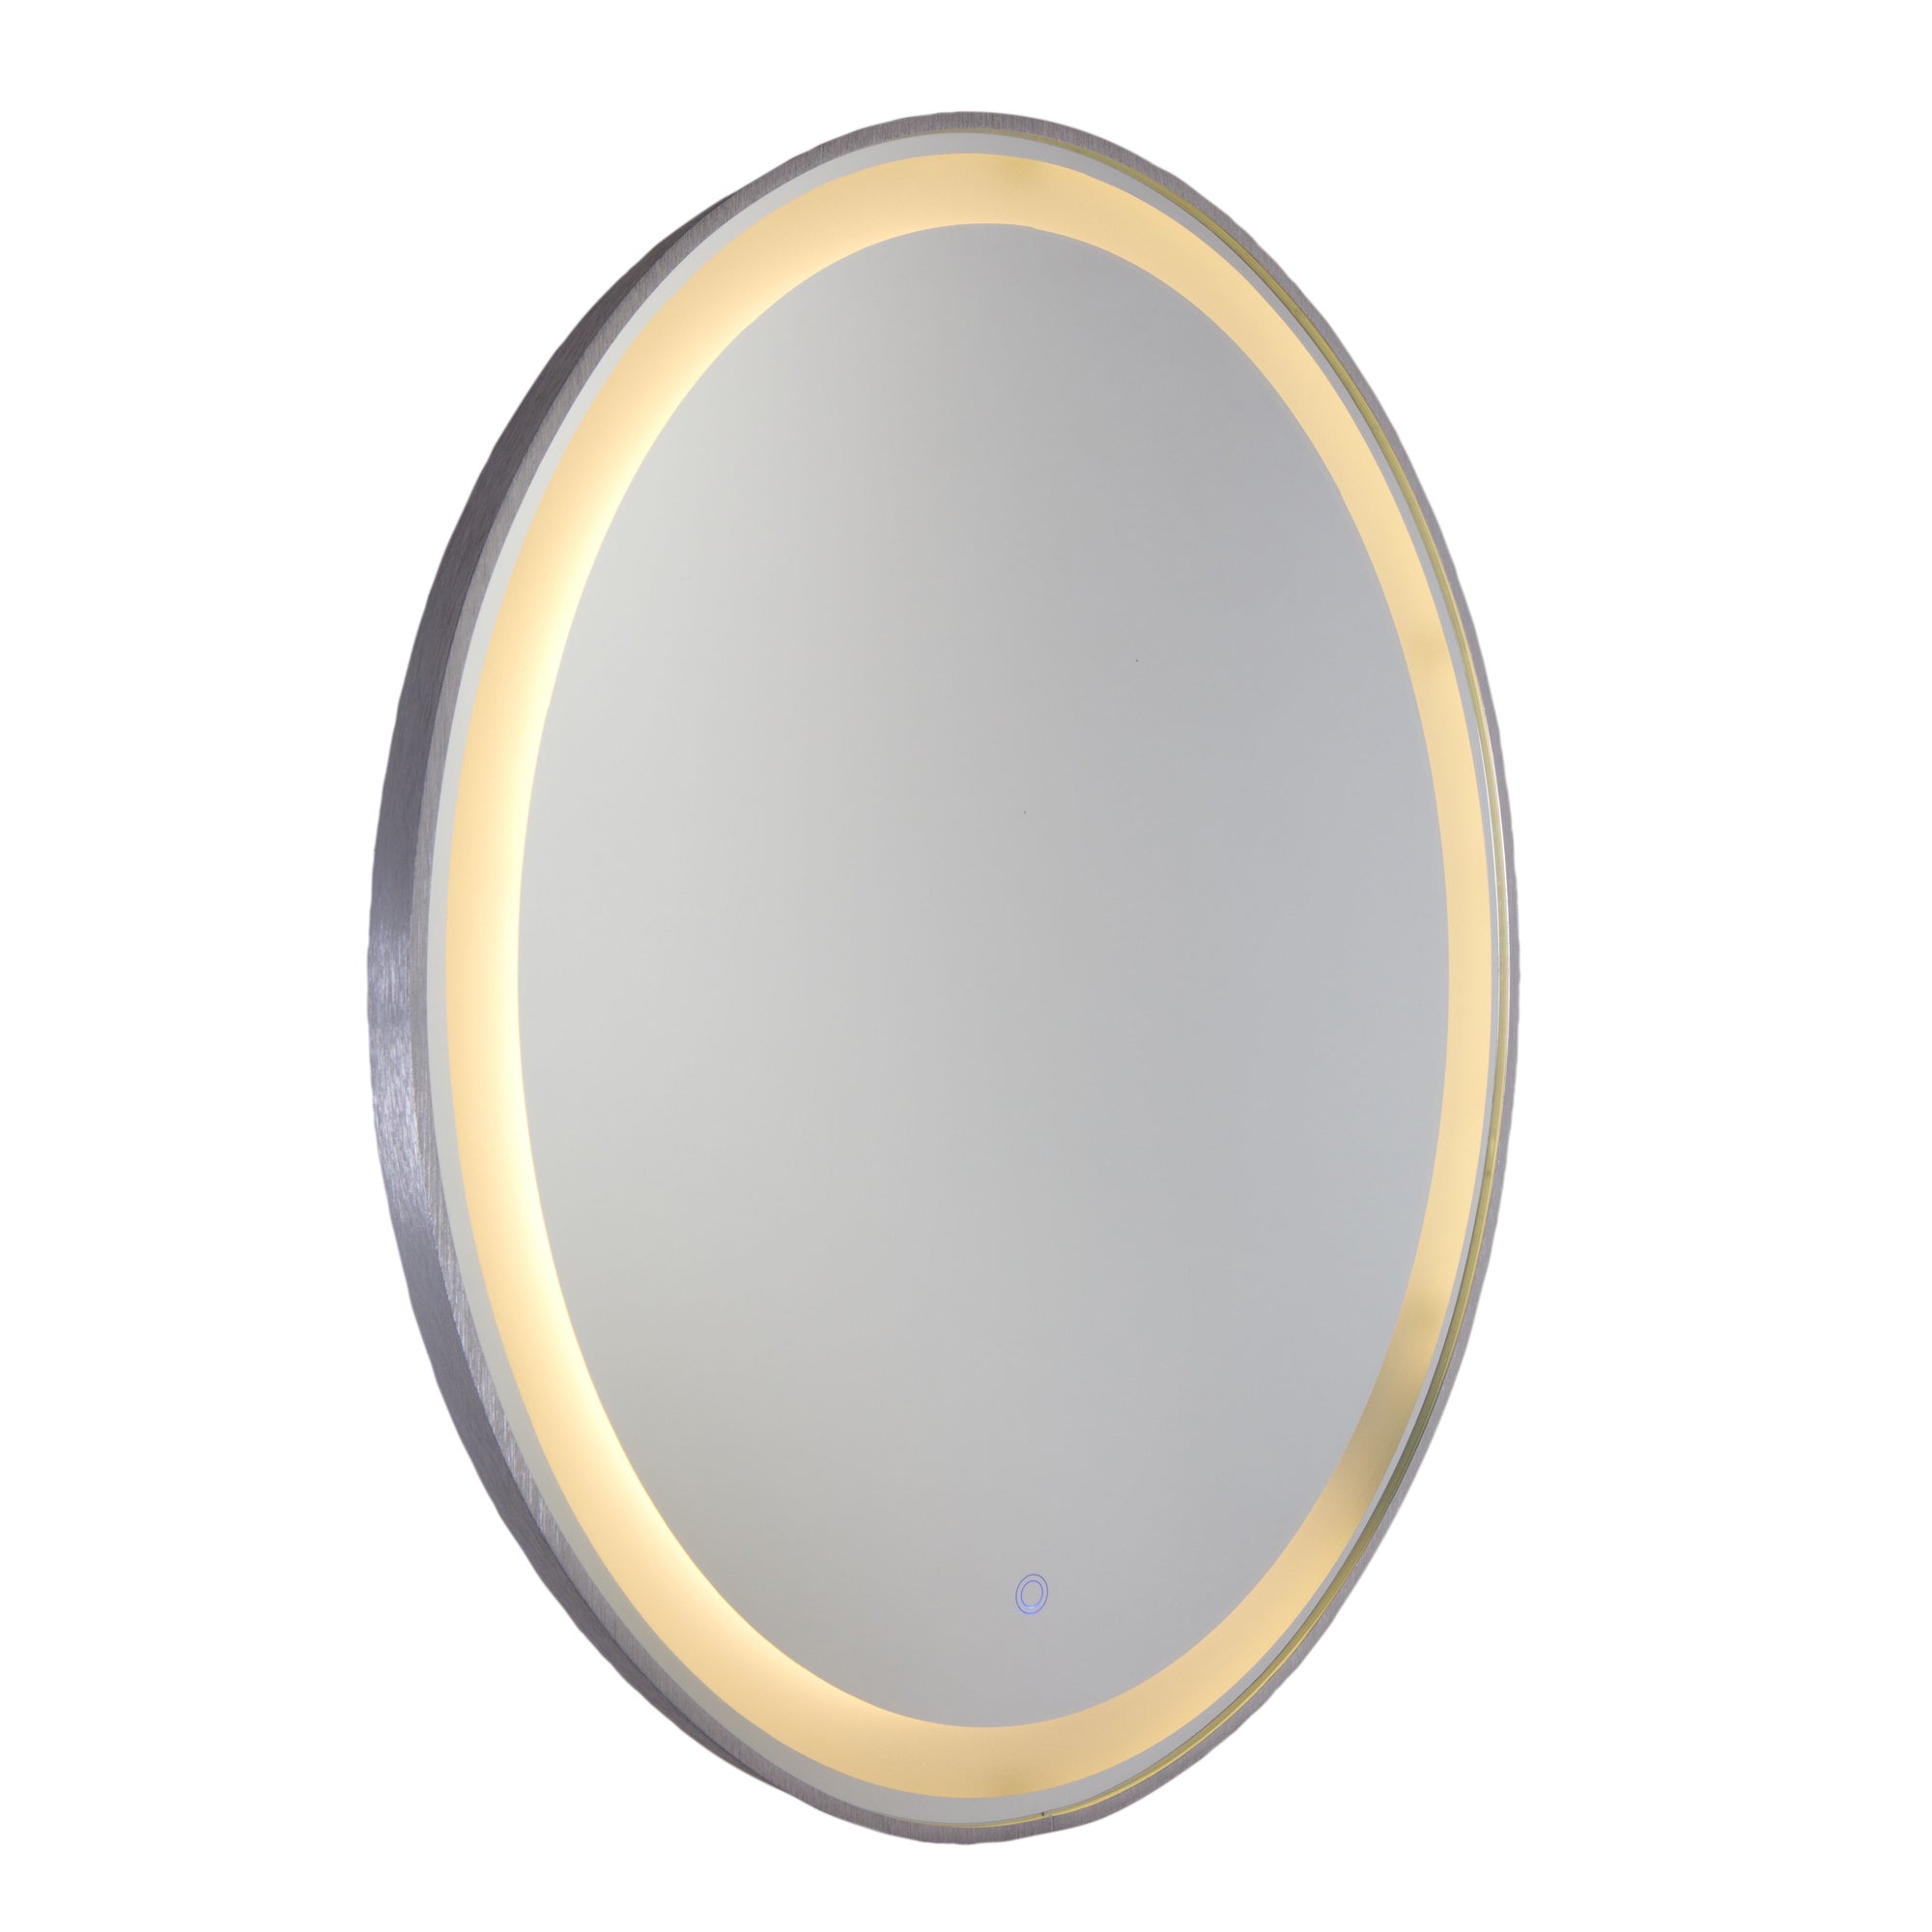 Reflections Lighted Mirror Brushed Aluminum